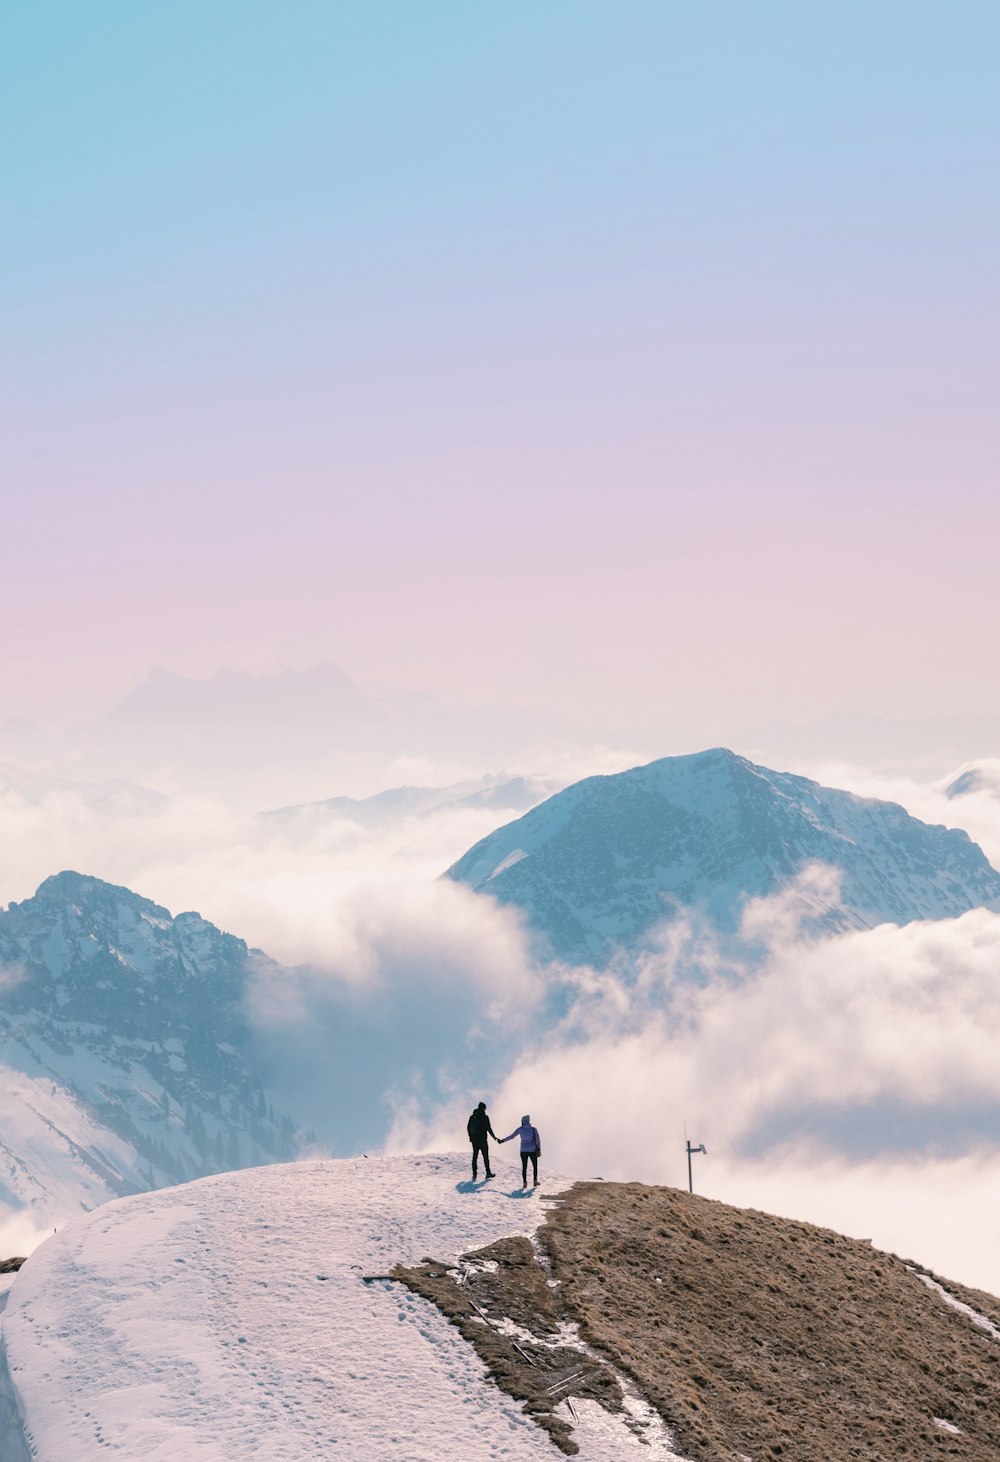 2 people walking on snow covered ground during daytime